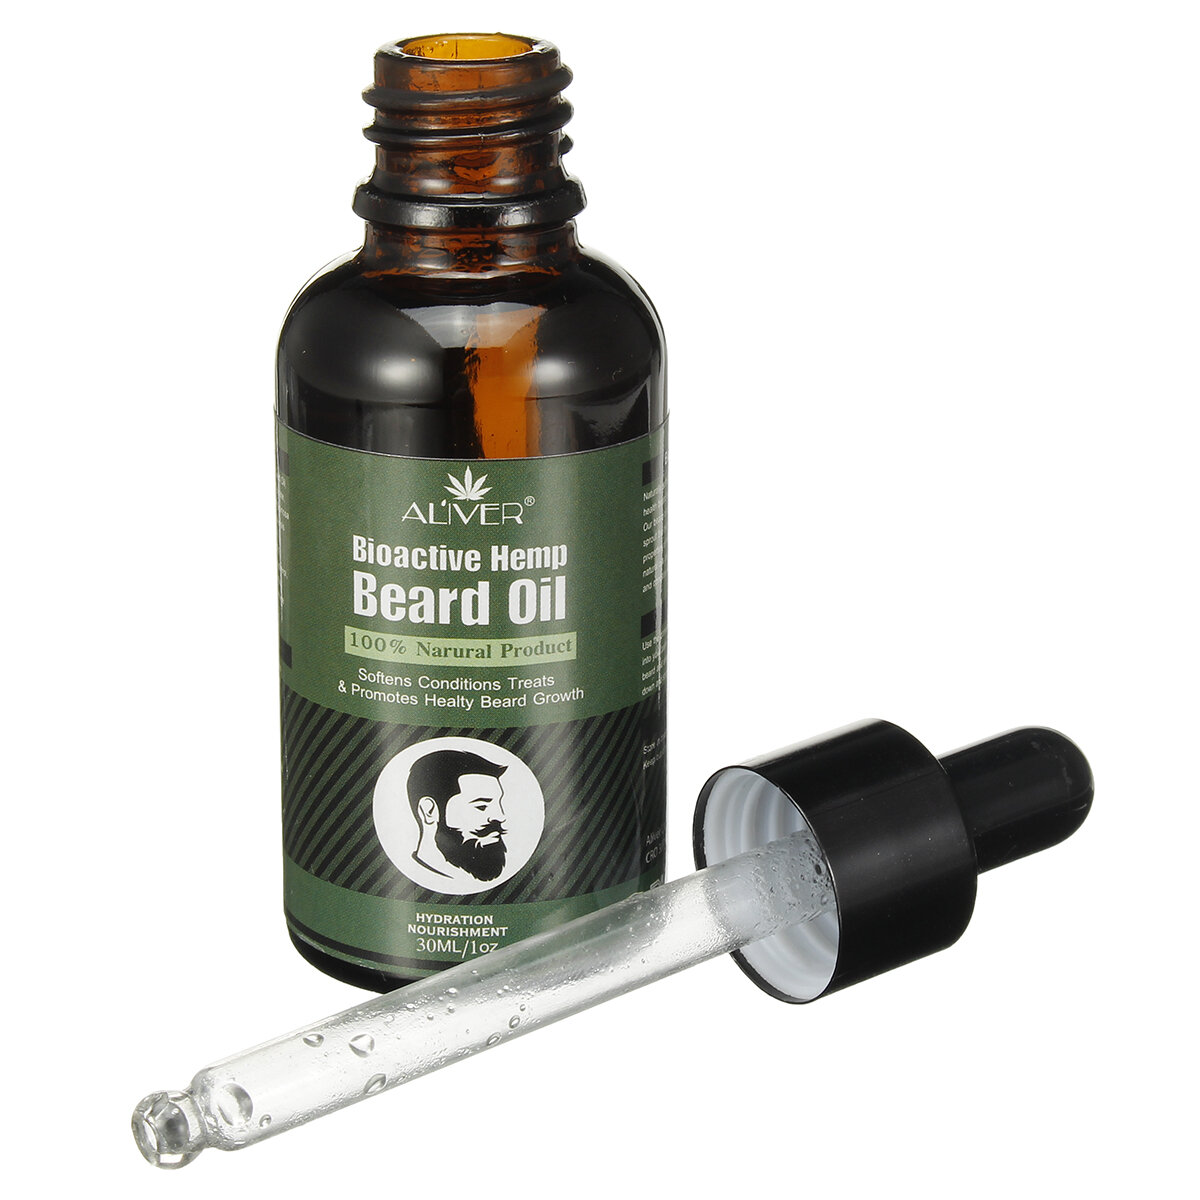 

100% Natural Plant Beard Oil Hair Growth Longer Thicker Essential Oils Grooming Tool